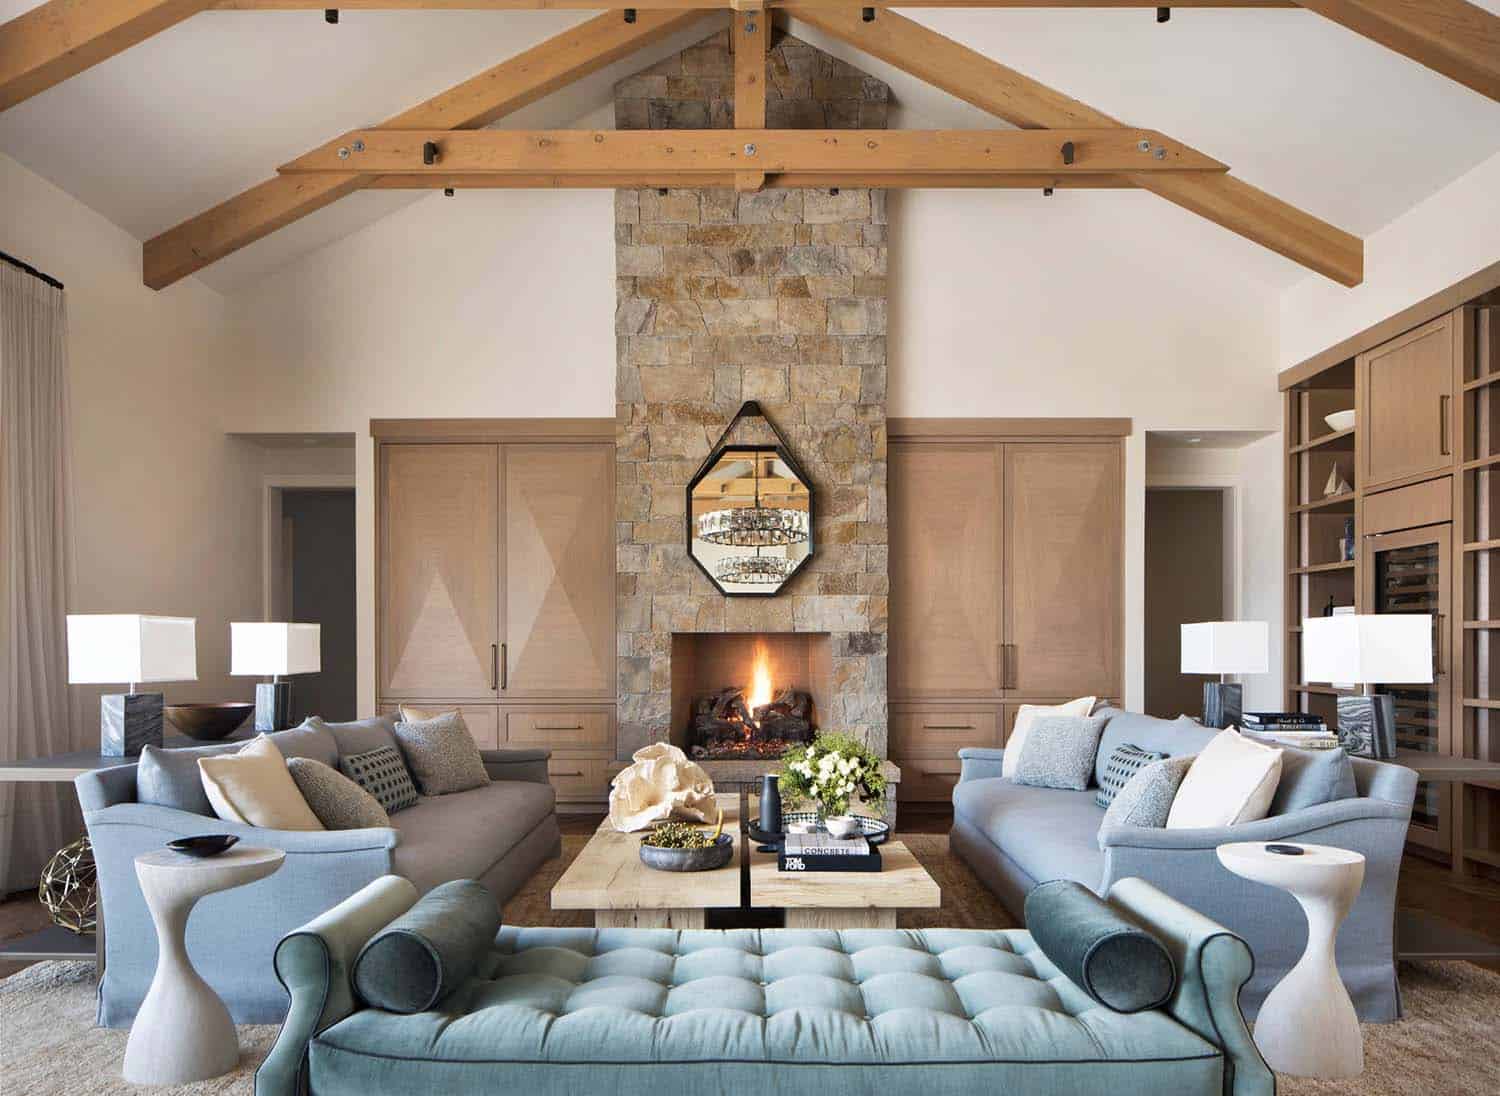 Beautiful rustic glam living room with rich textures